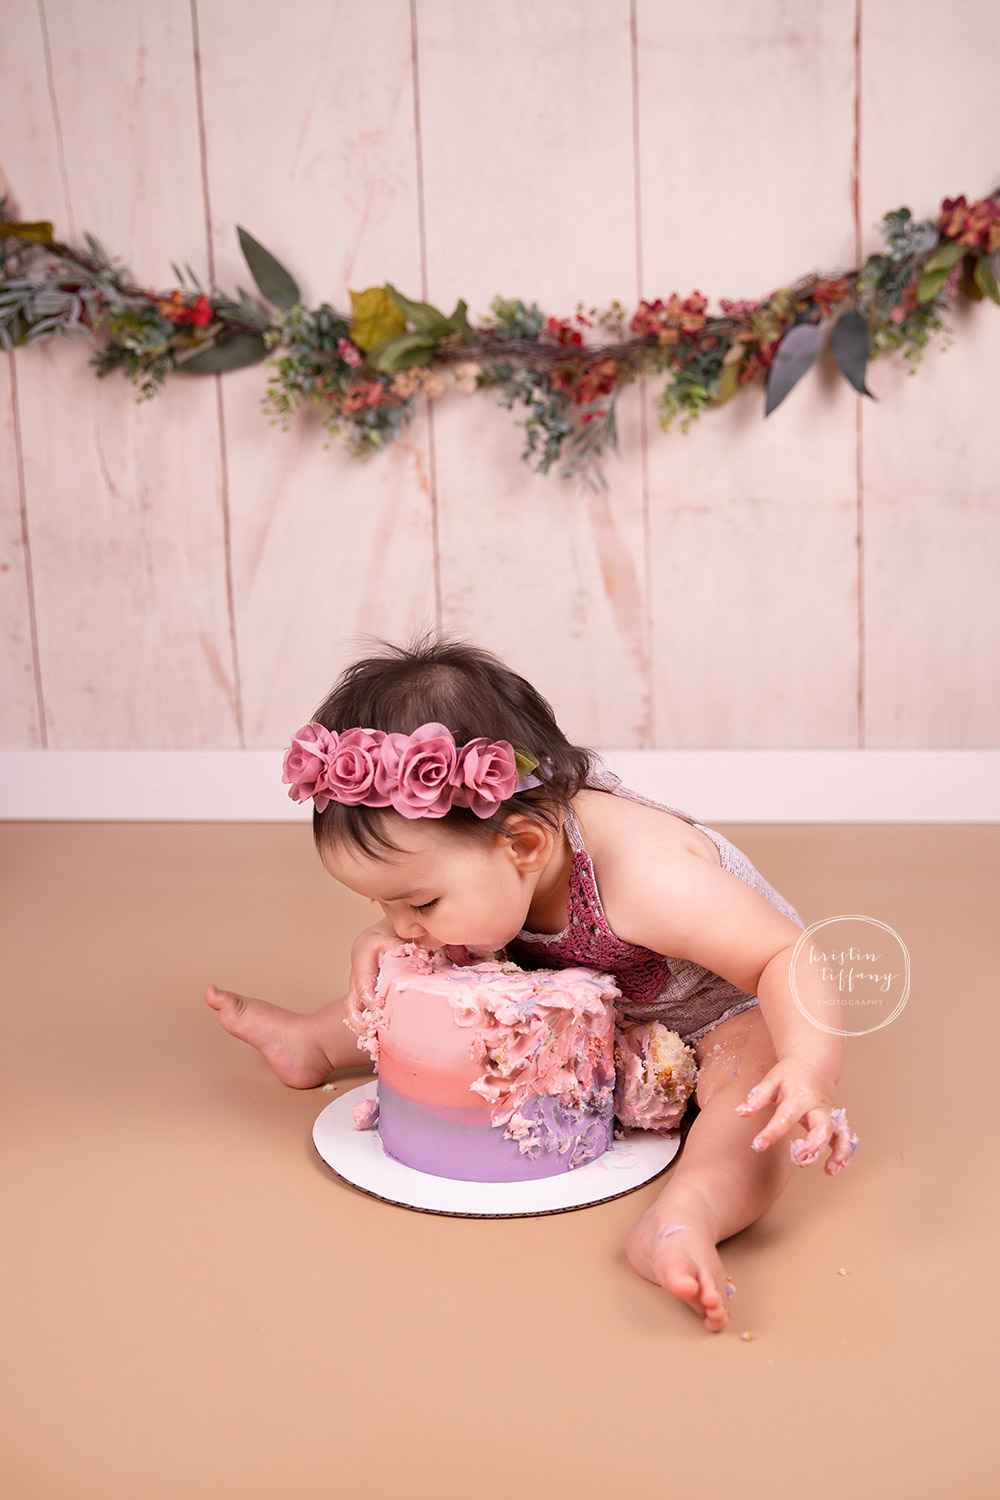 a photo of a baby girl at a cake smash photo session